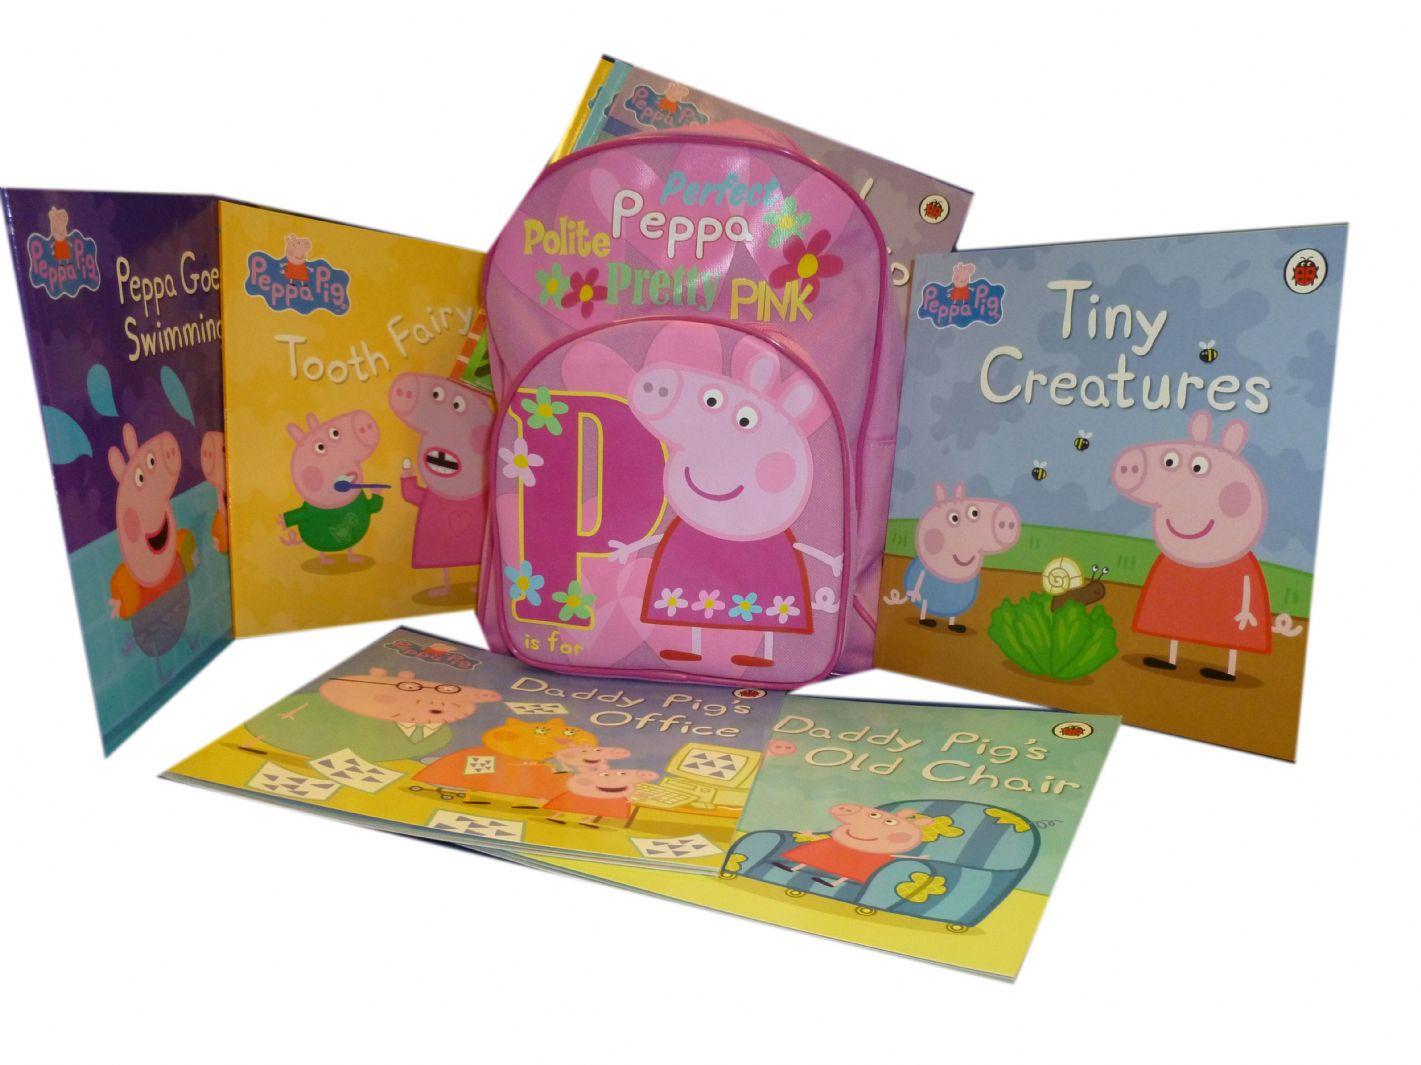 Foto Peppa Pig Collection Books Set With Backpack foto 247944